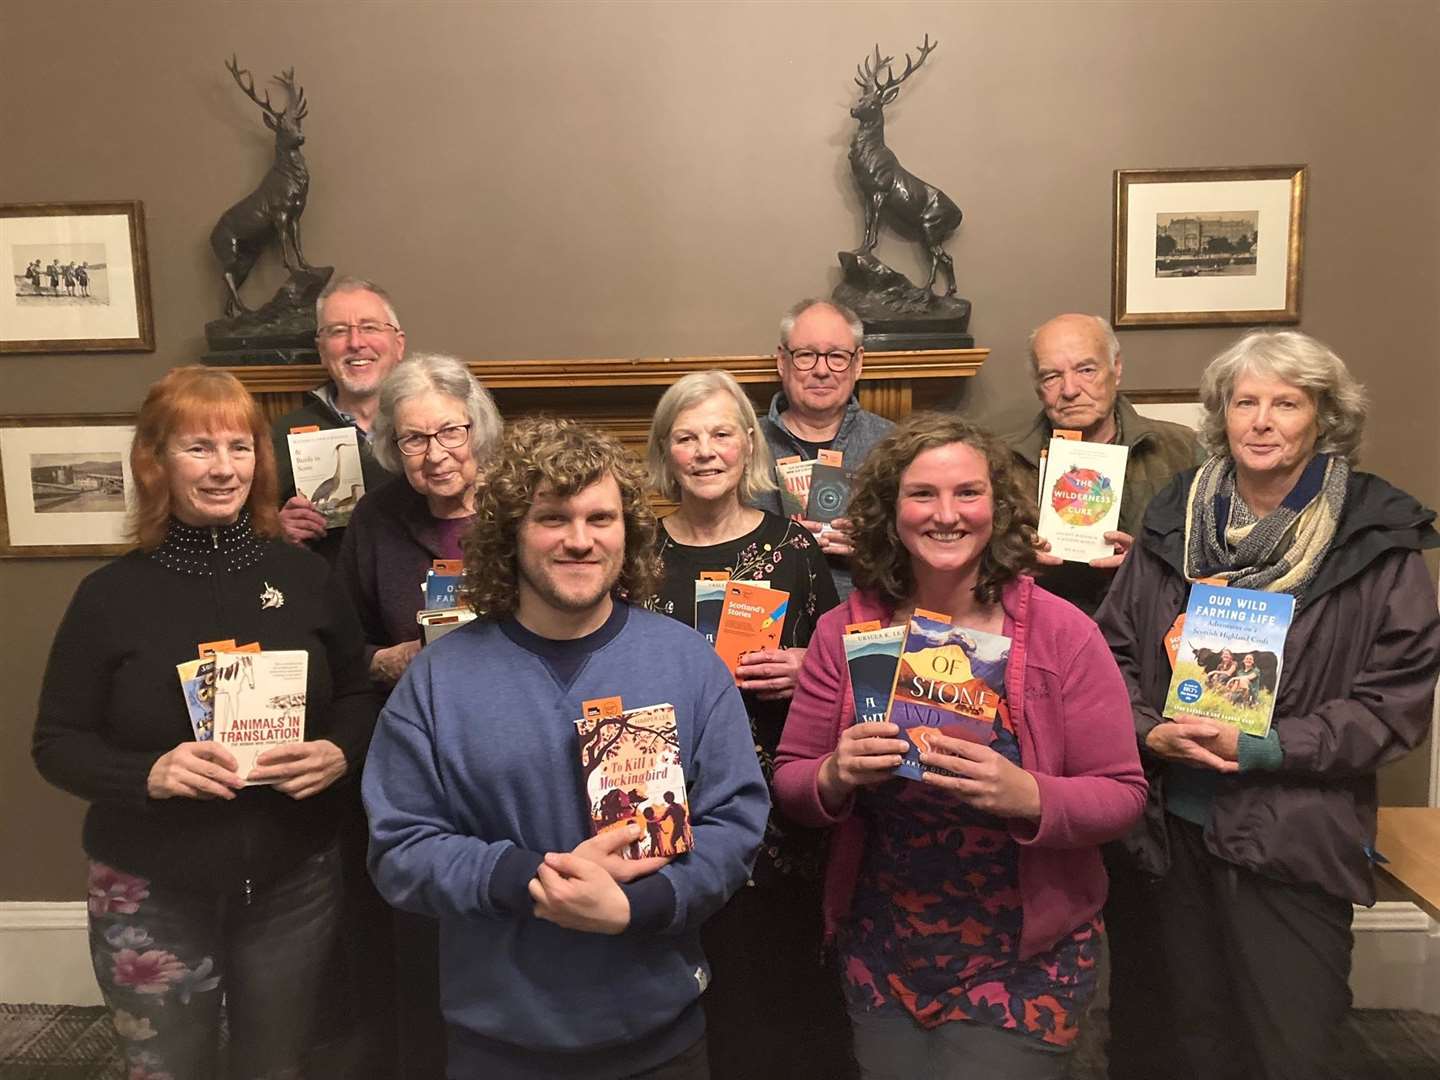 Some of those attending the Highland LIT 'Special Books' event.